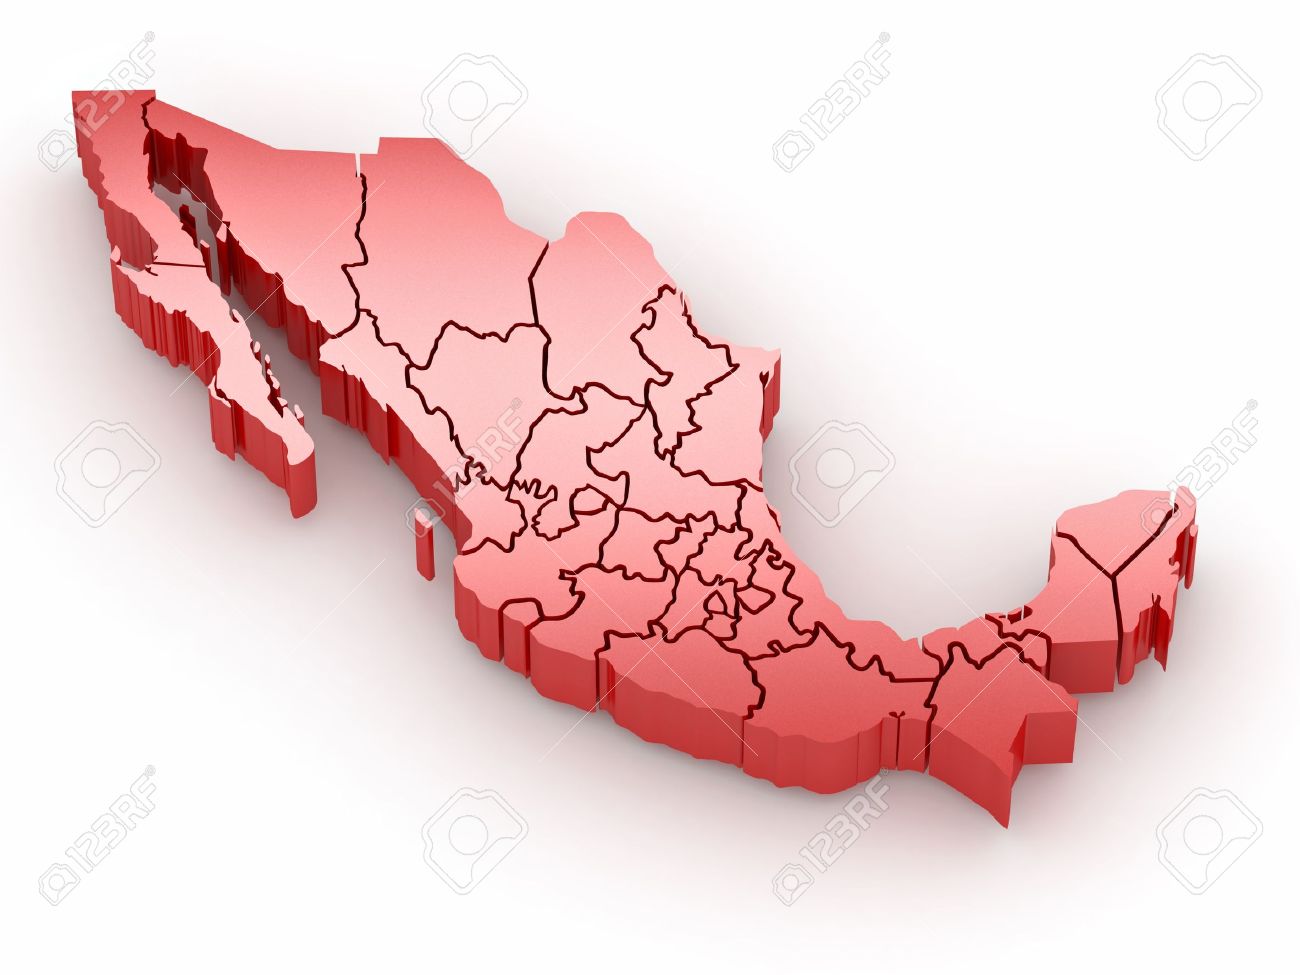 8779611-Three-dimensional-map-of-Mexico-on-white-isolated-background-3d-Stock-Photo.jpg